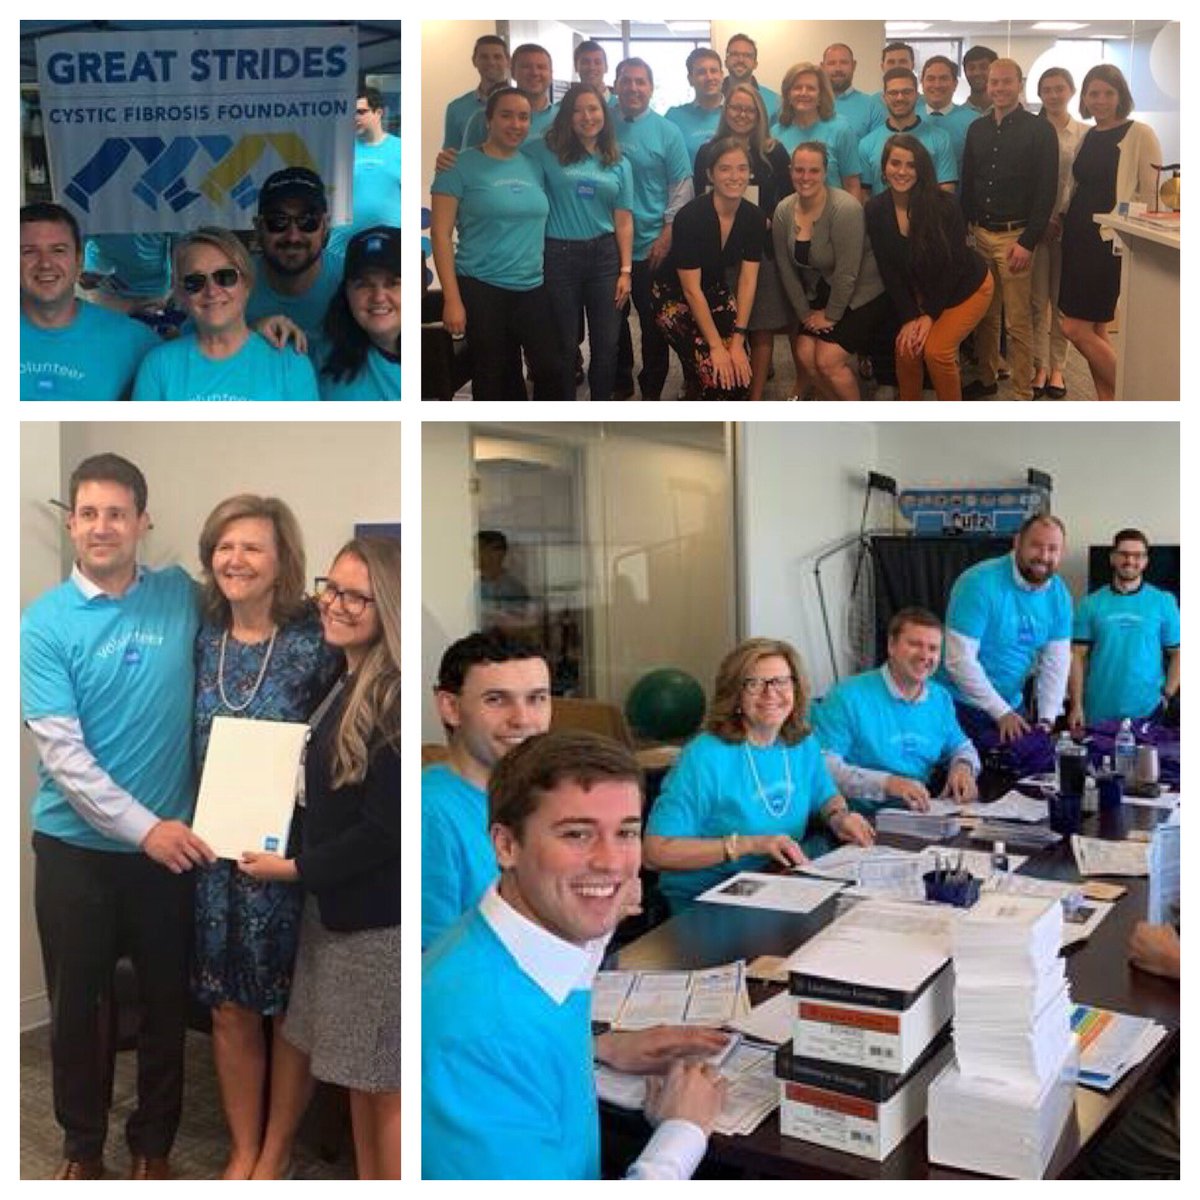 This is Schwab’s 16th annual Volunteer Week —  so proud to join my colleagues for Great Strides and support The Cystic Fibrosis Foundation’s work to find a cure. #Schwab4good #GreatStrides